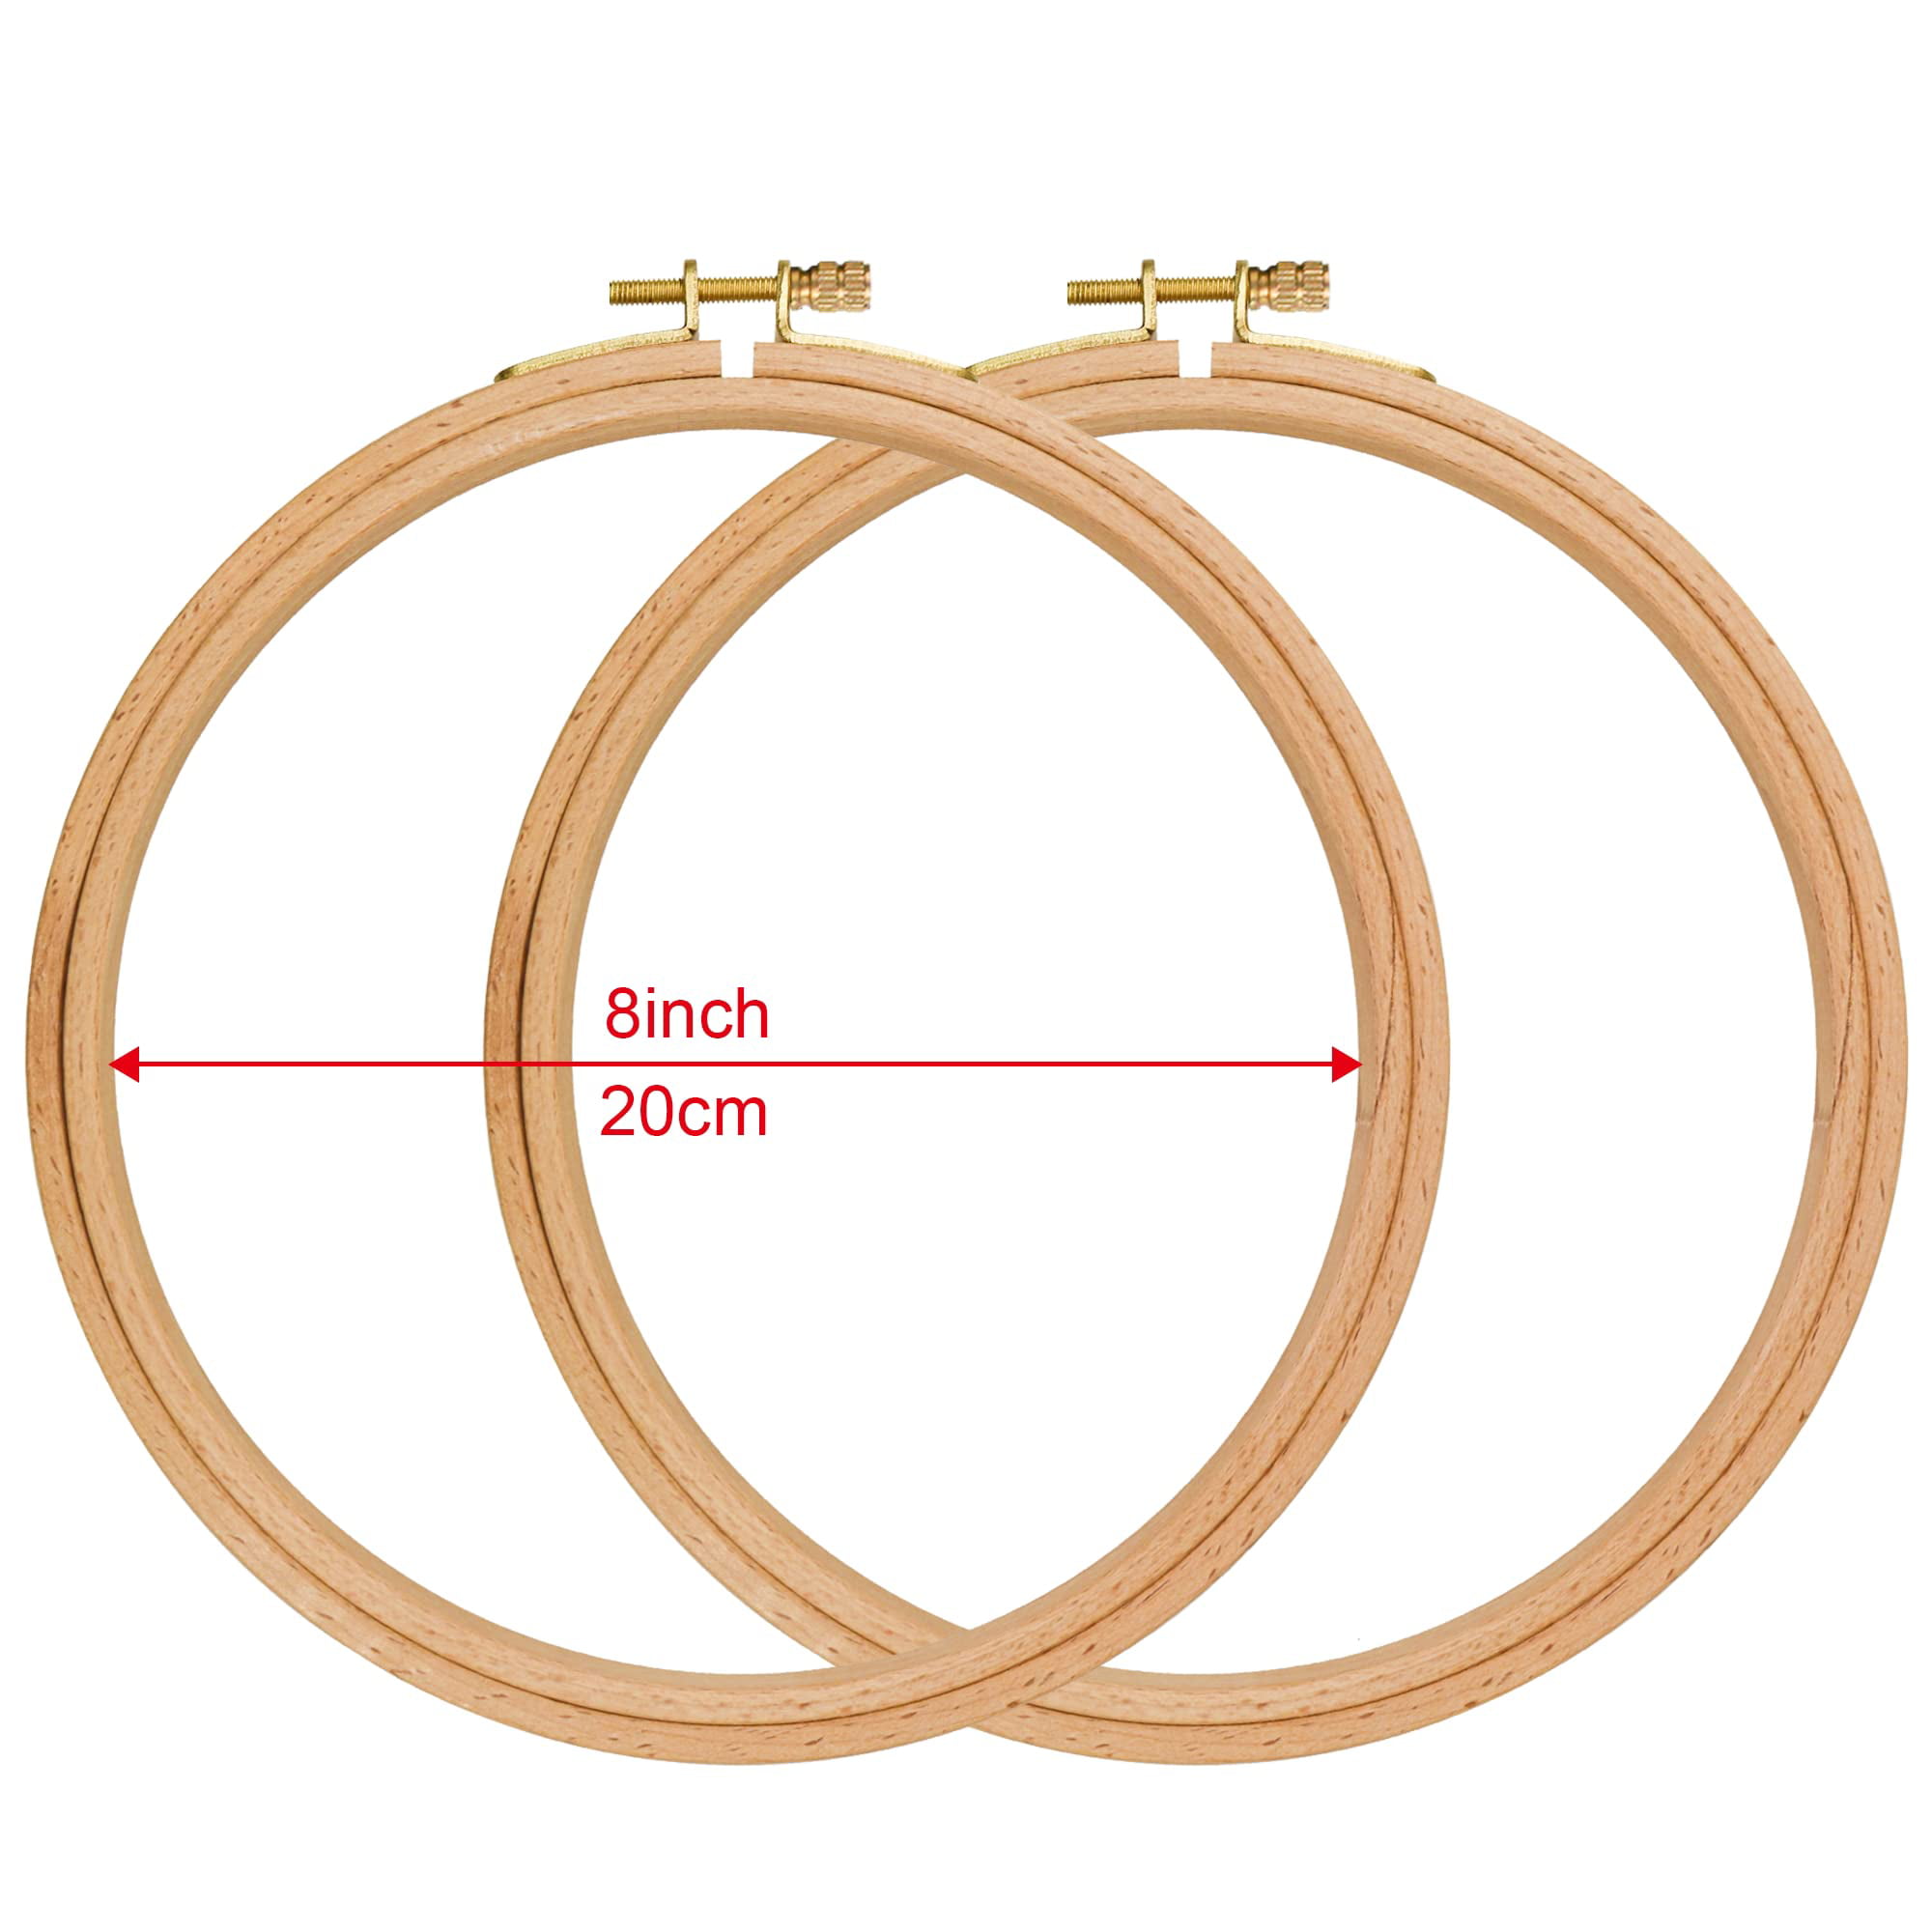 Embroidery Hoops 8 Inch Wooden - 2 Pieces Cross Stitch Hoops Frames, Beech  Wood Embroidery Frame Kits Decorative Hanging Circle Hoop Ring for Craft  Sewing 